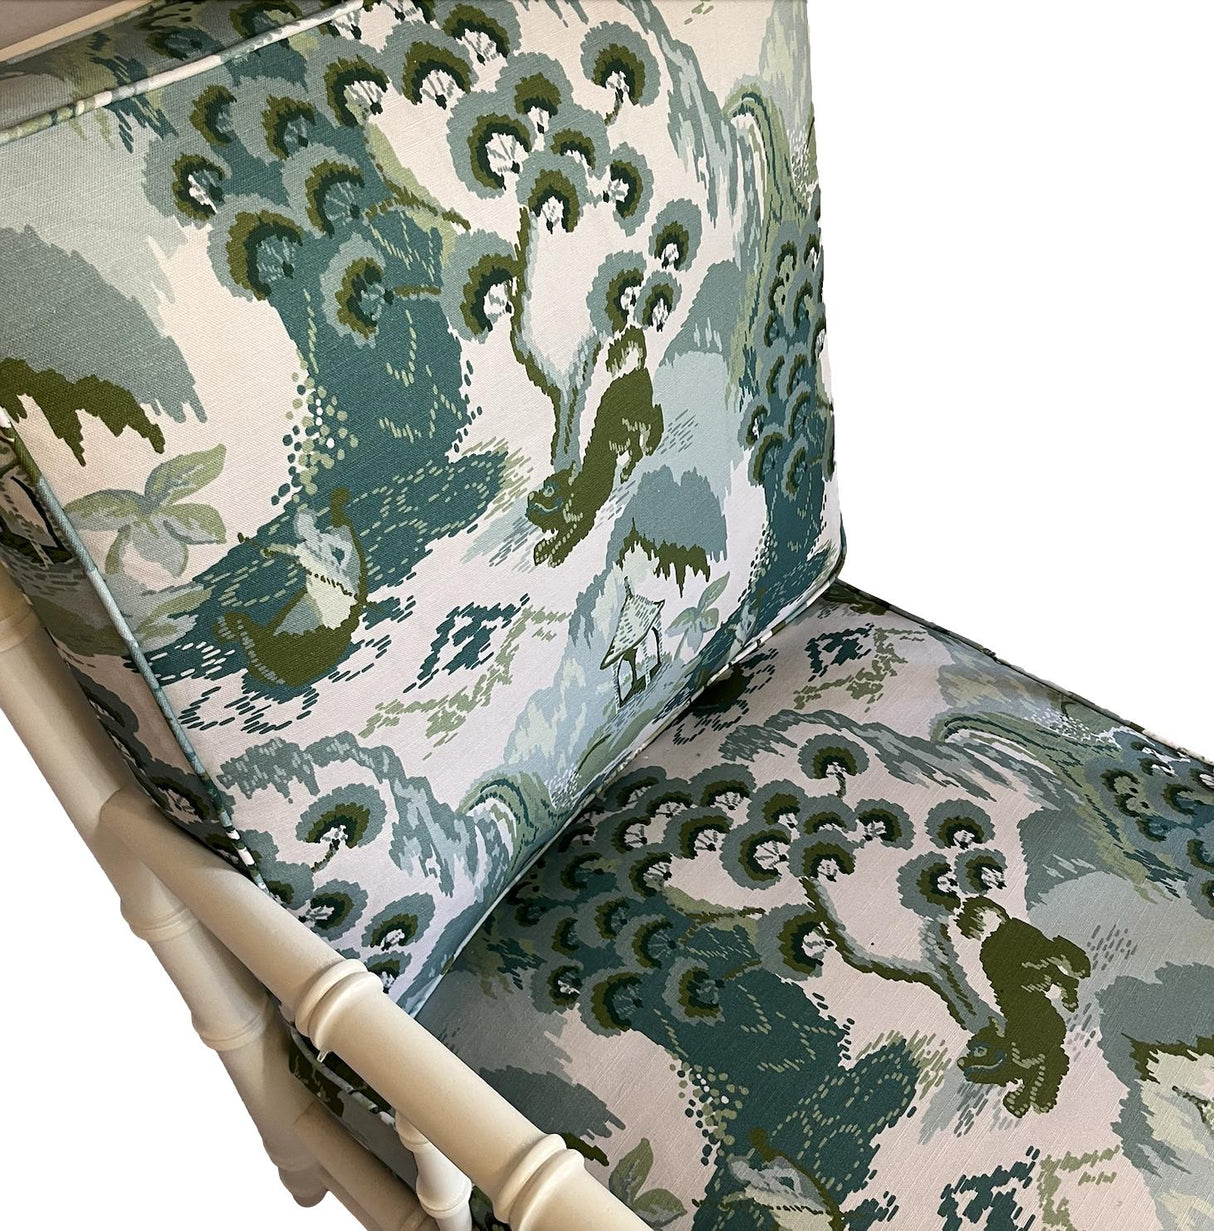 Faux-Bamboo Armchair w/Madcap Cottage Old Peking Upholstery